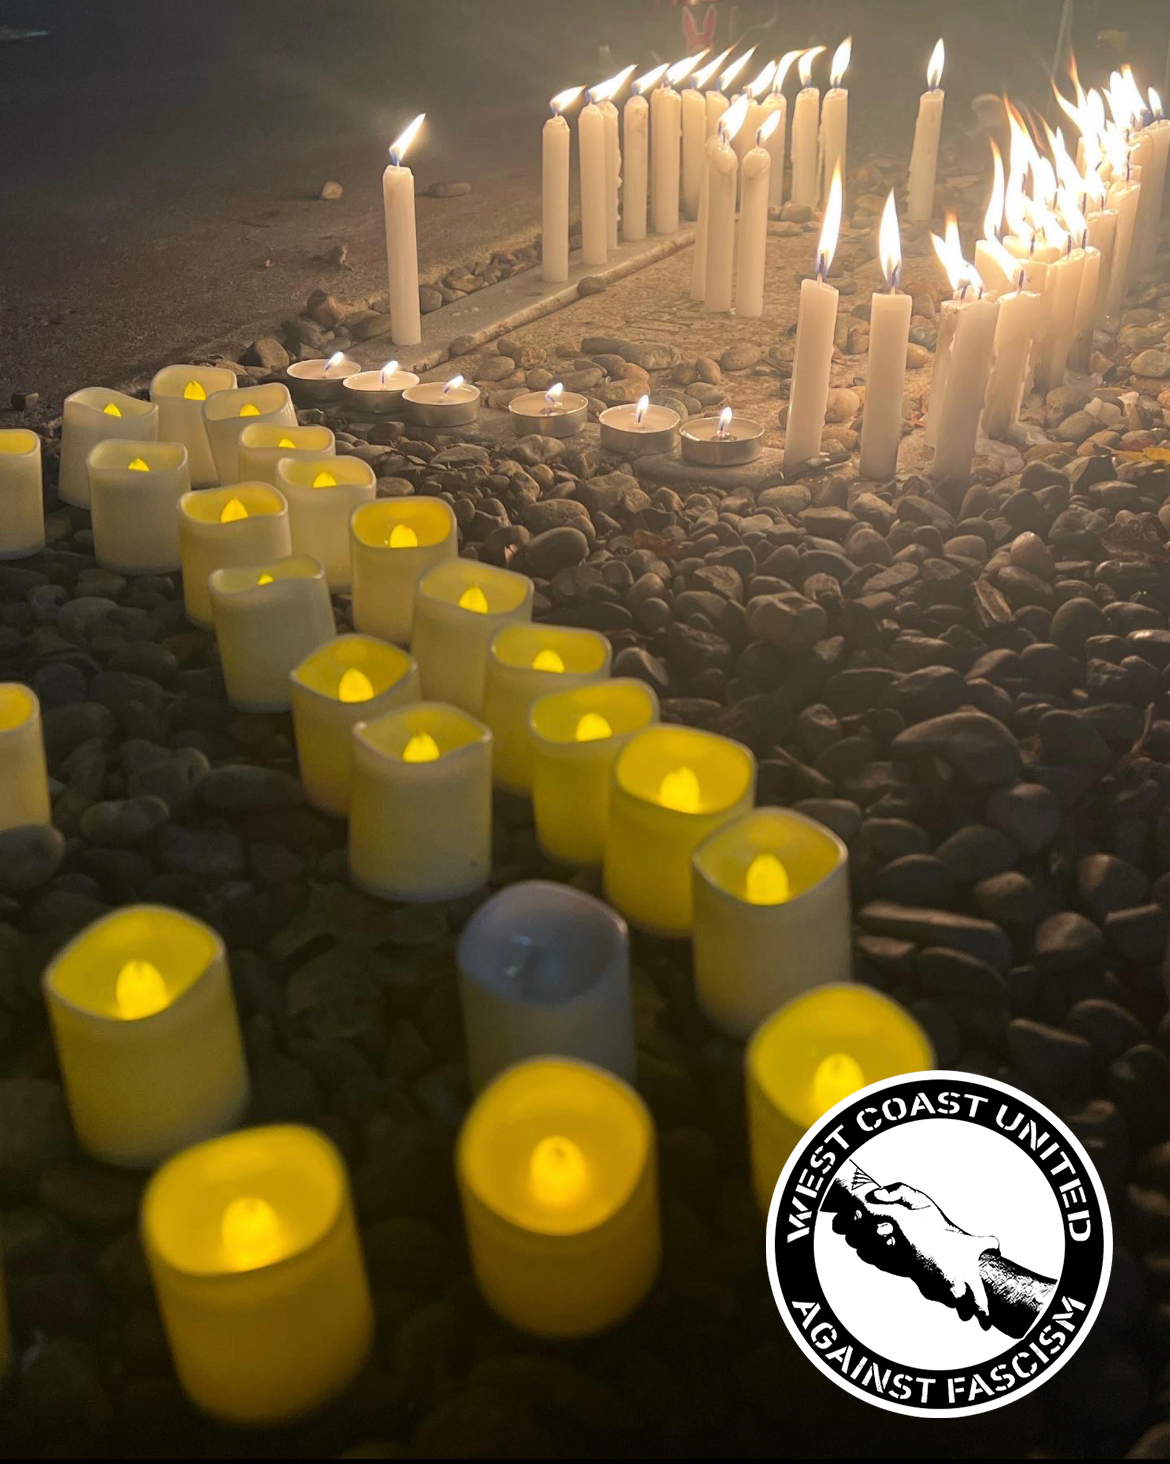 A row of battery powered candles and fire lit candles sit across a row of strewn pebbles and rocks across the ground. The darkness of the image is contrasted by the light from the candles.